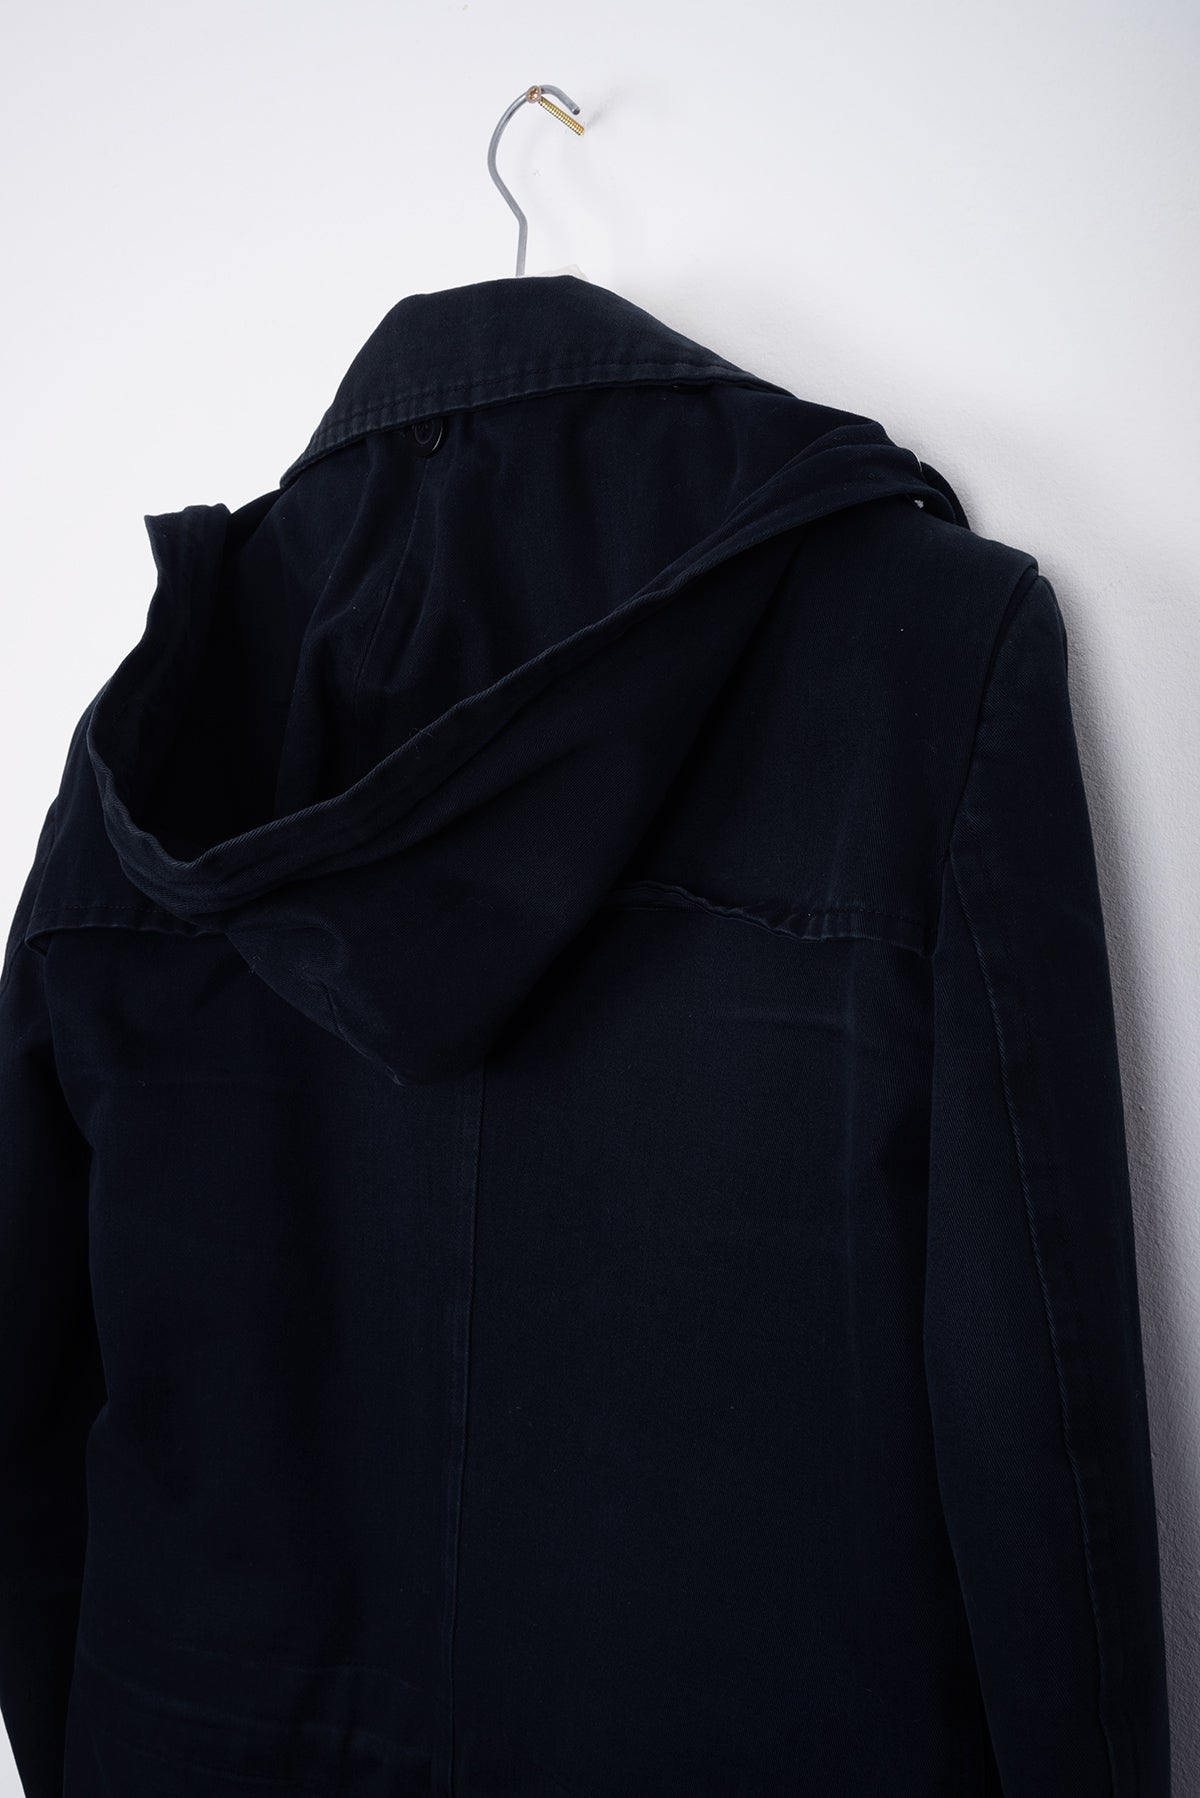 2005 A/W HOODED COTTON PARKA